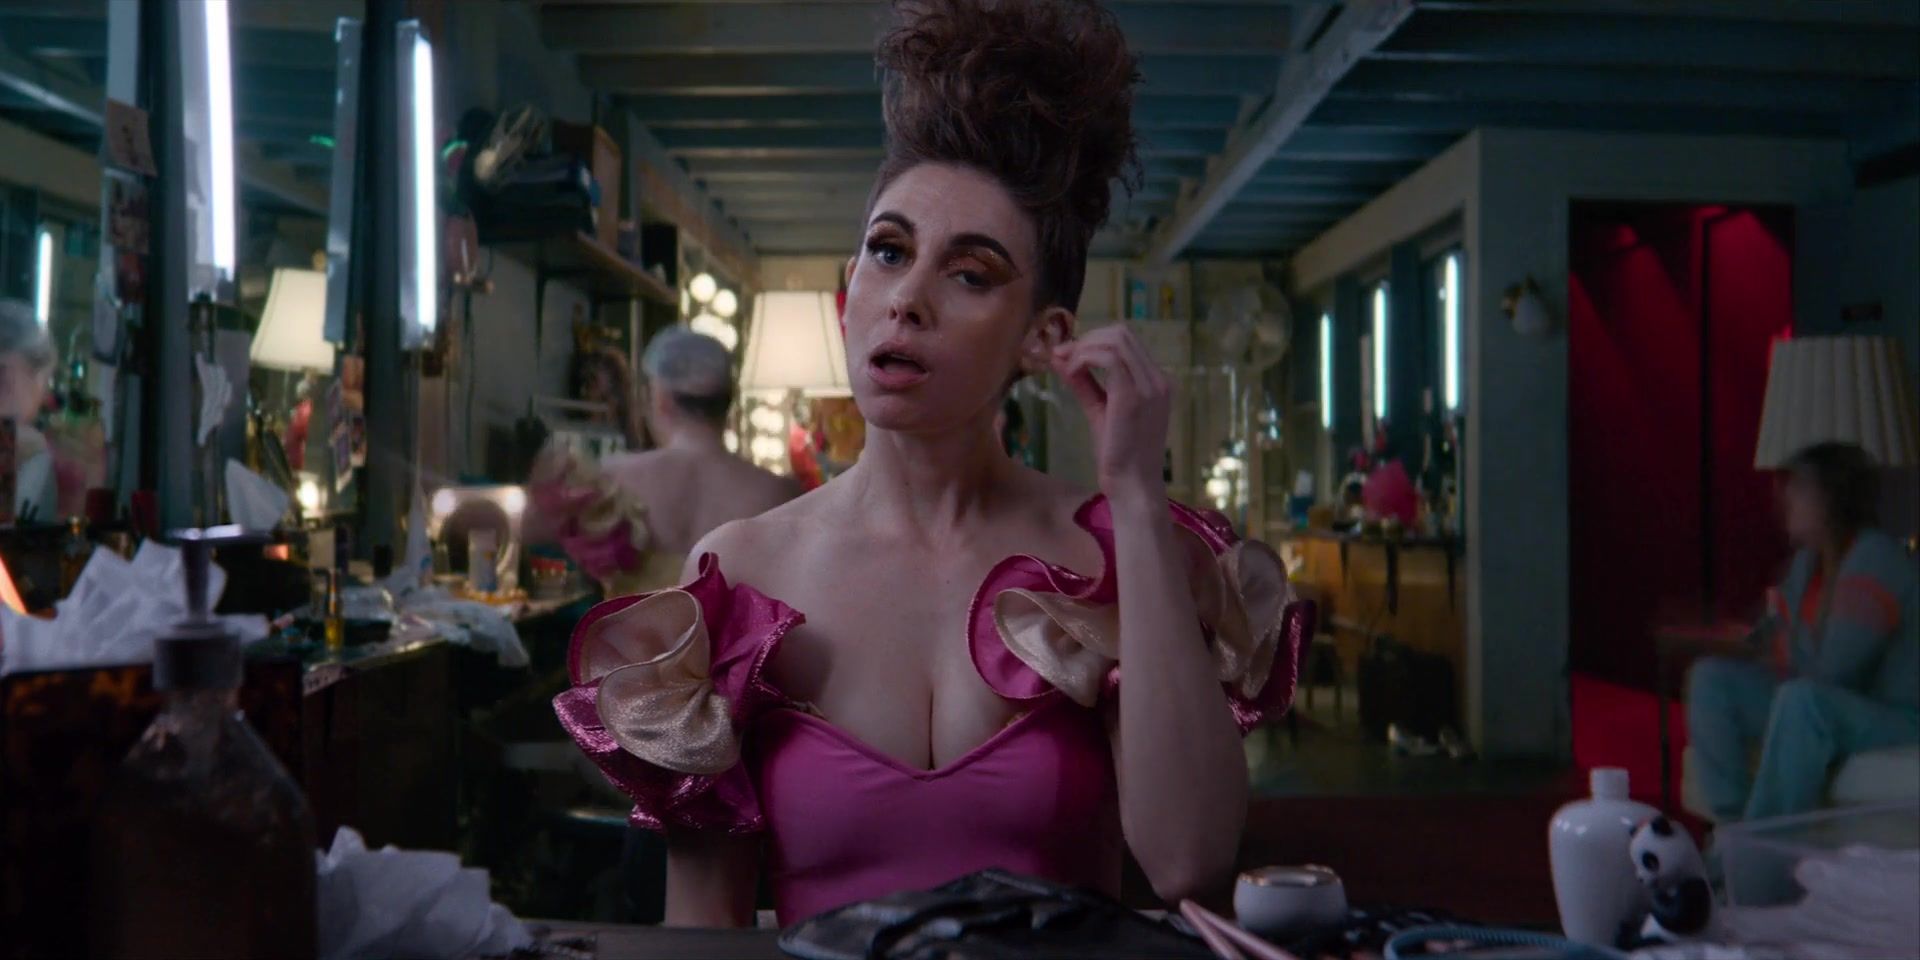 CameraBoys Alison Brie, Kate Nash nude - Glow s03e08-10 (2019) Pick Up - 2